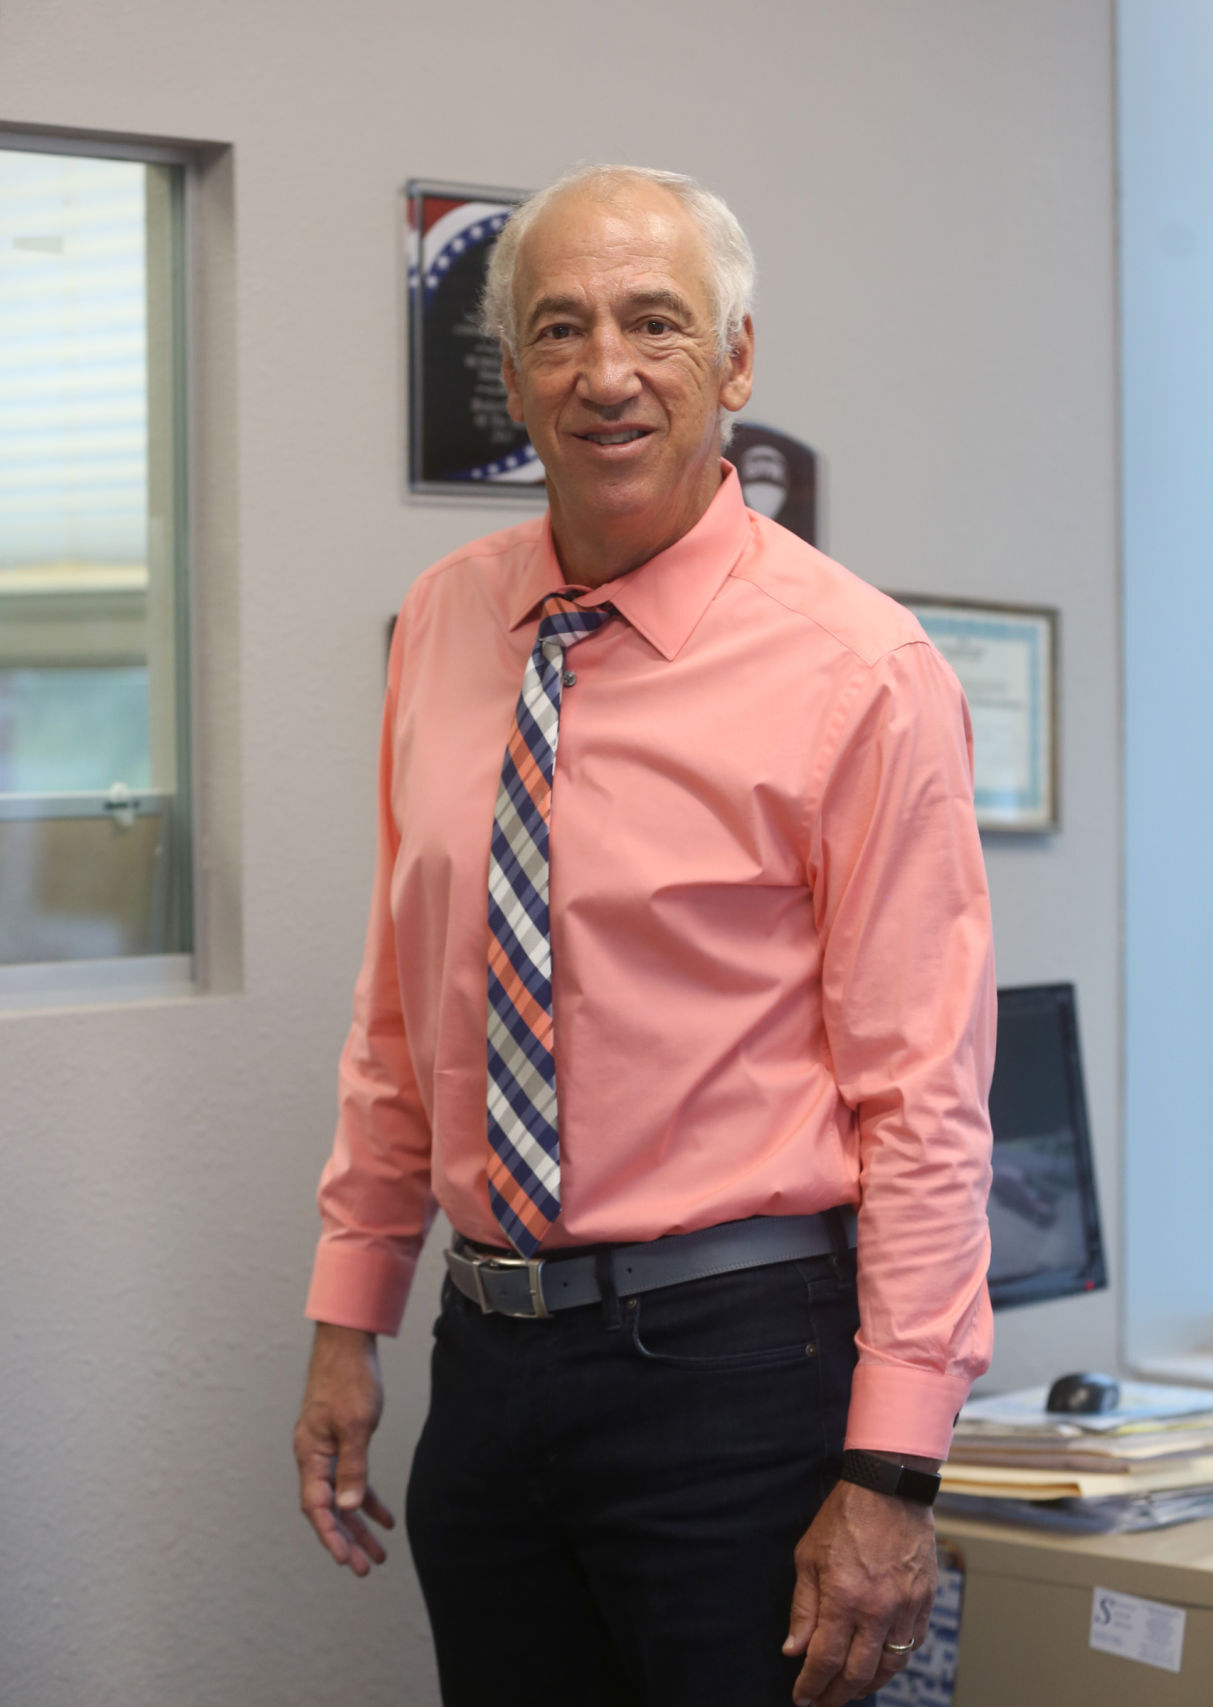 Greg Adams is owner and broker at ReMax Advantage Realty and will be featured in the Biz Times’ Meet a Local Leader. Photo taken Tuesday, May 19, 2020.    PHOTO CREDIT: Jessica Reilly